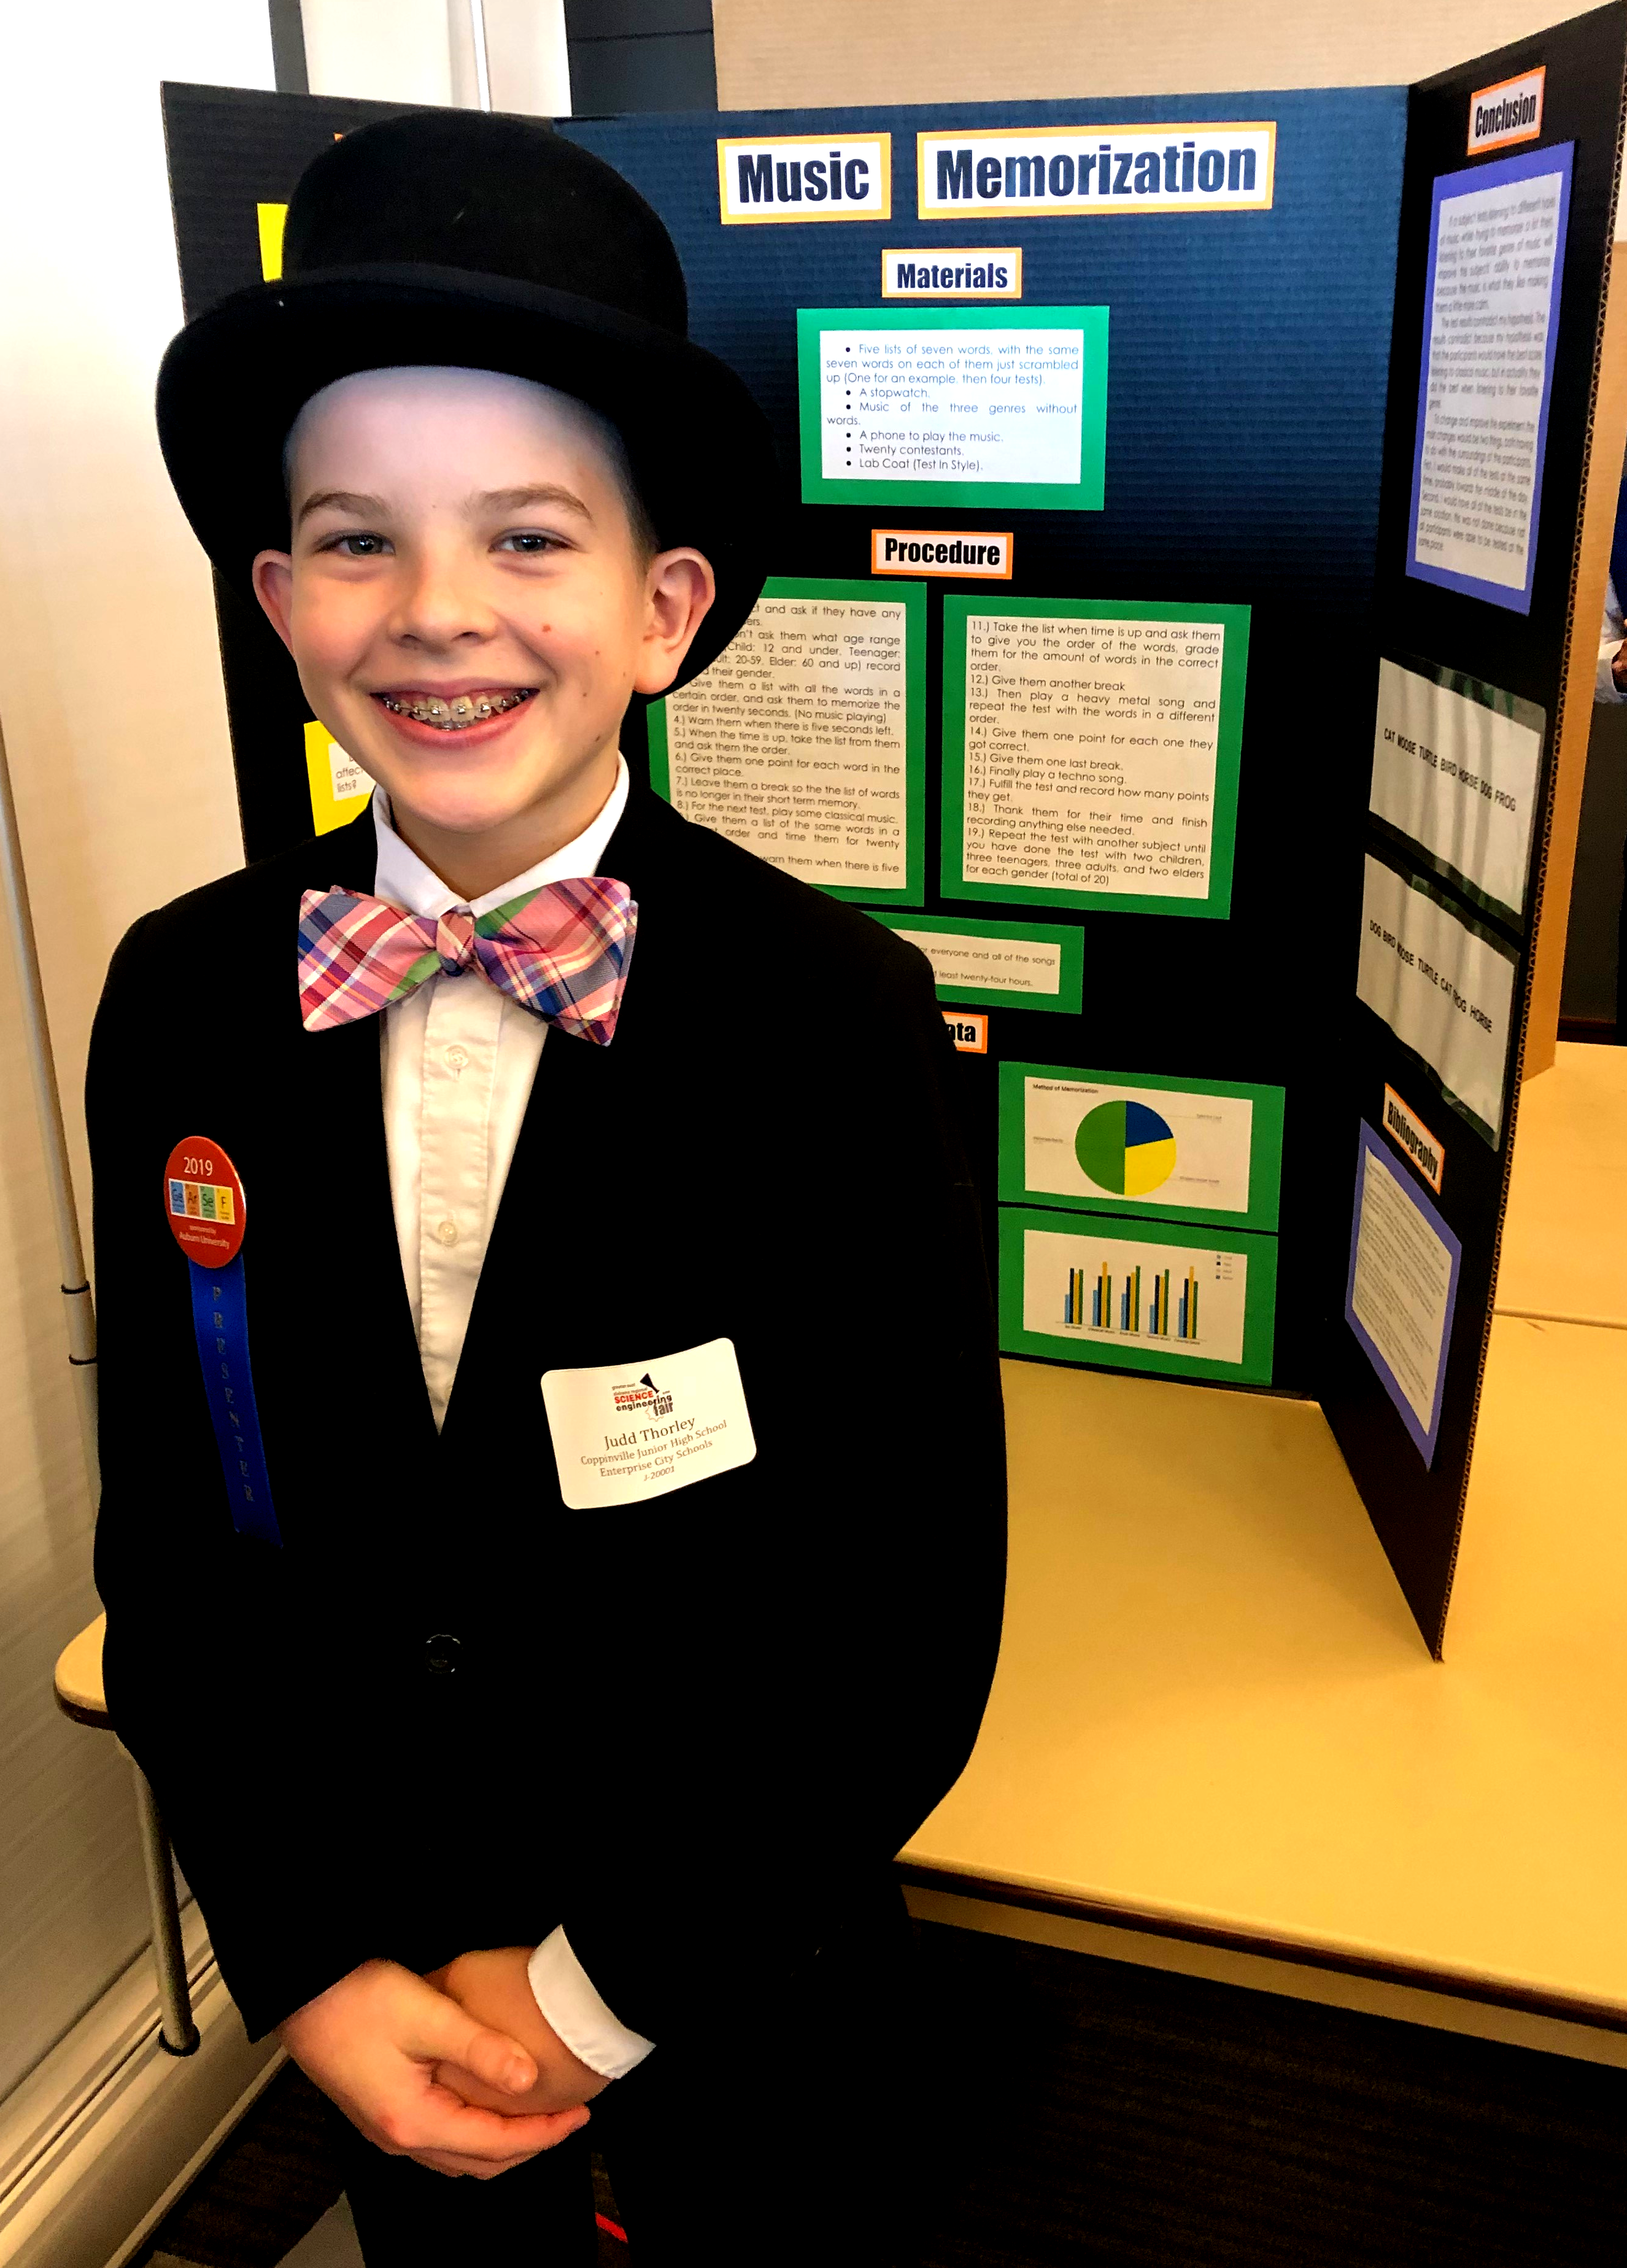 Judd Thorley, a student from Coppinville Junior High School in Enterprise, Alabama, showcased his project titled “Music Memorization” at this year's event.